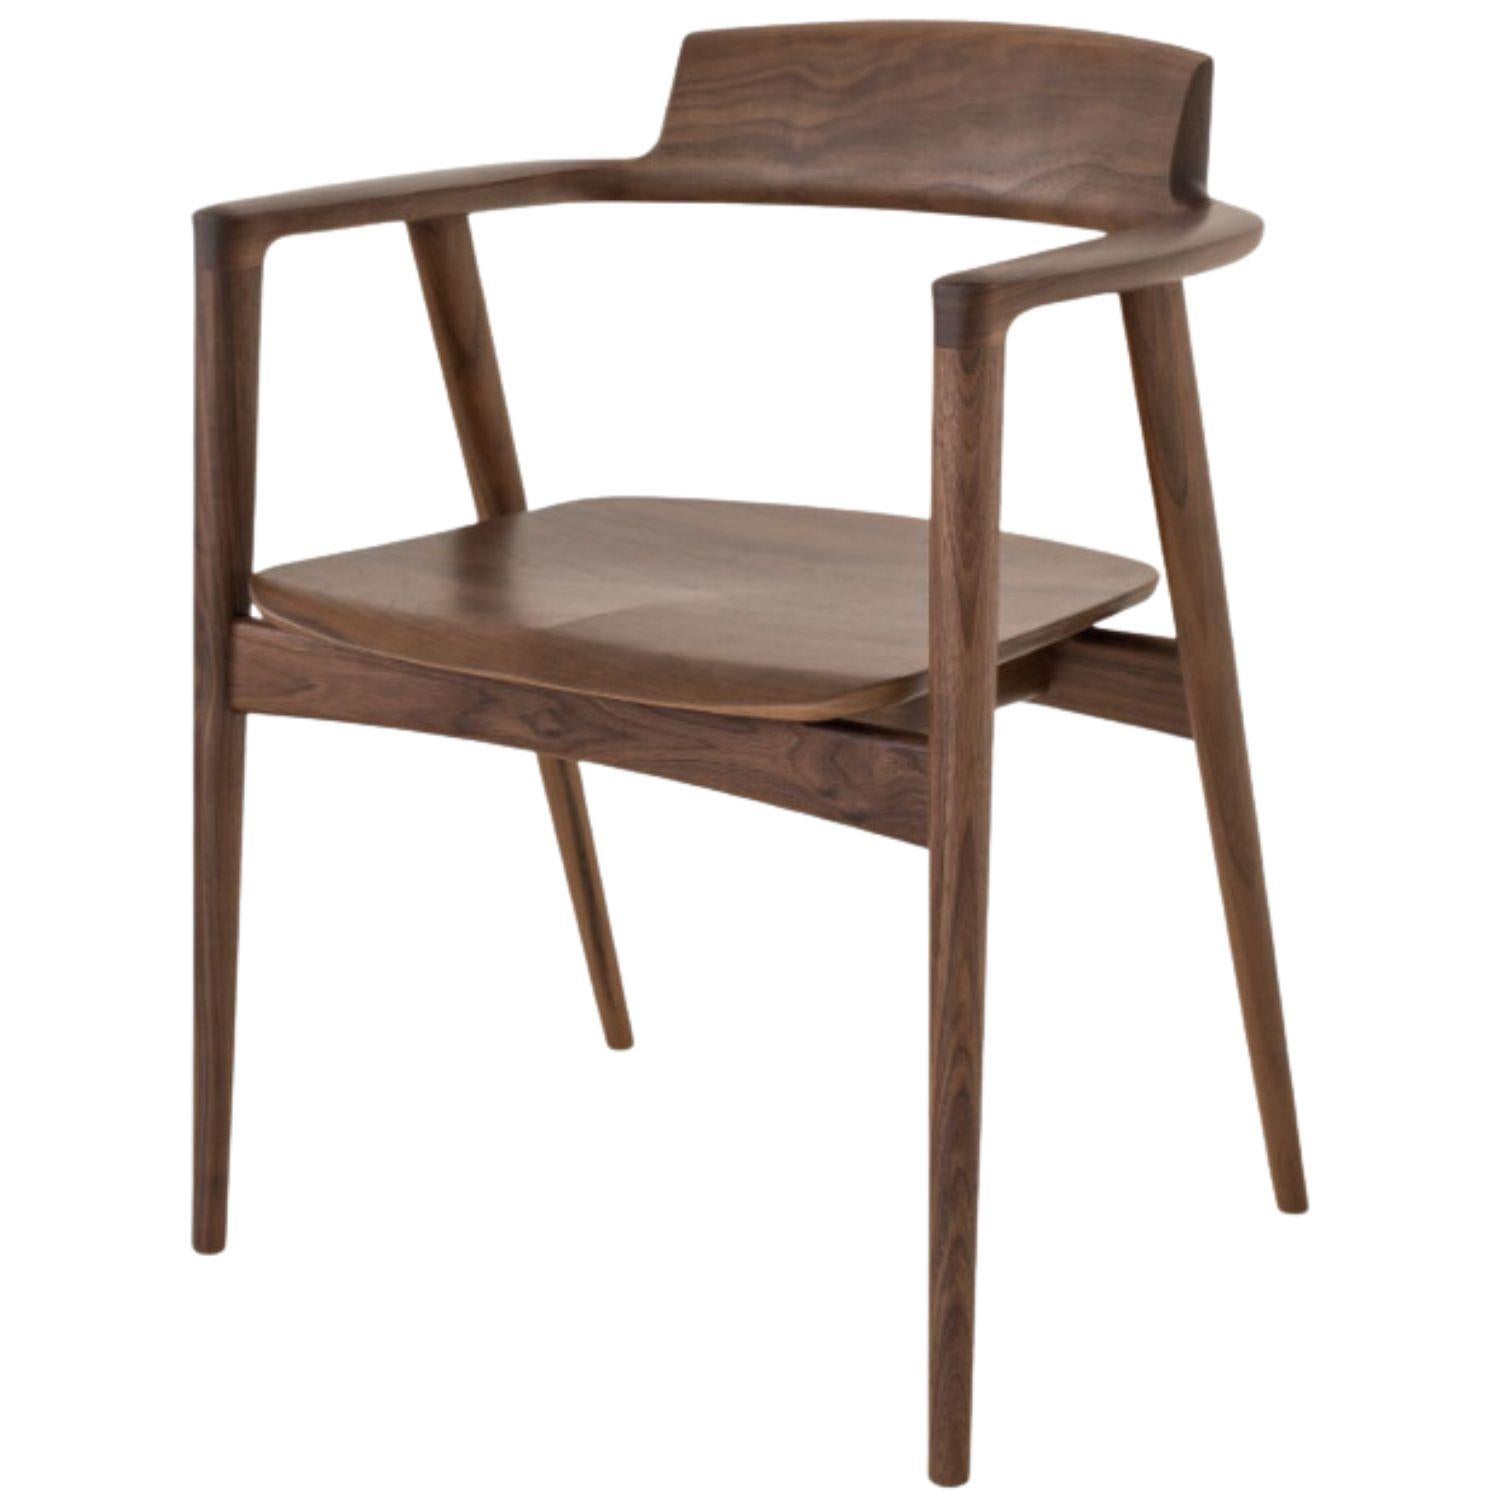 Motomi Kawakami 'Seoto KD221' Dining Armchair in Upholstery and Oak for Hida For Sale 4